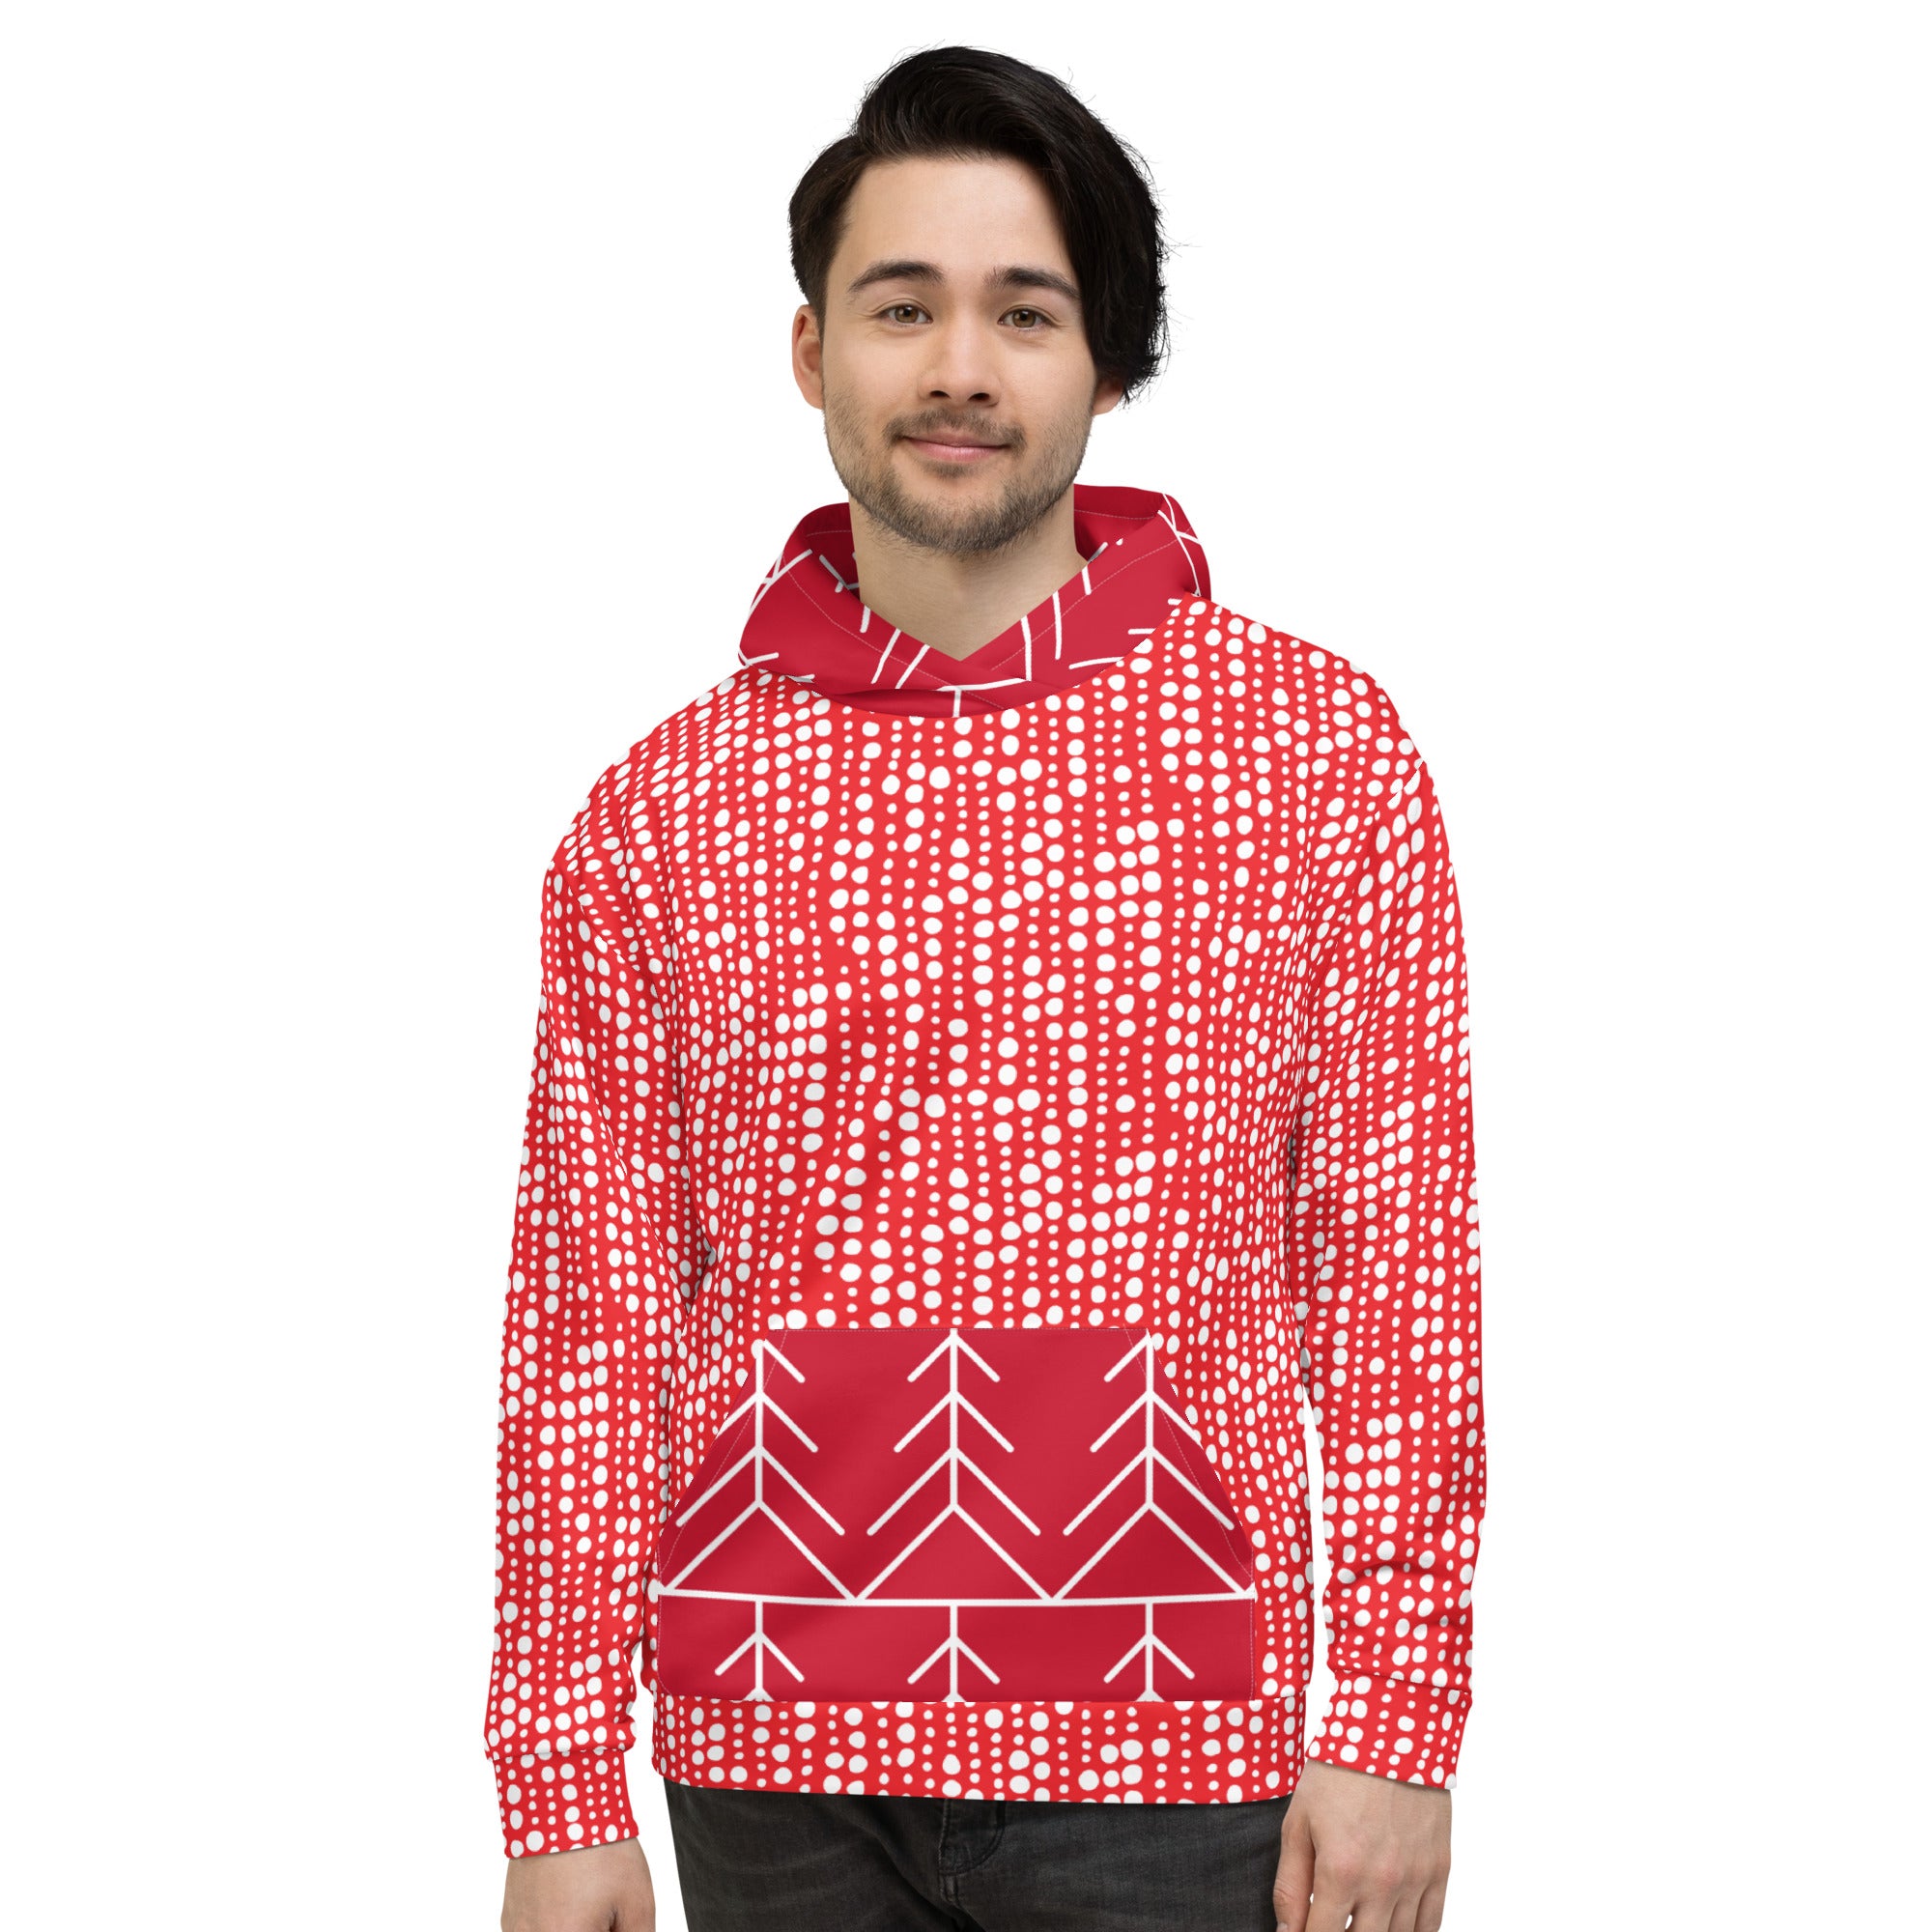 Buy All about the Red Unisex Hoodie - Stylish Comfort at DIANES DELIGHT FUL PRINTS